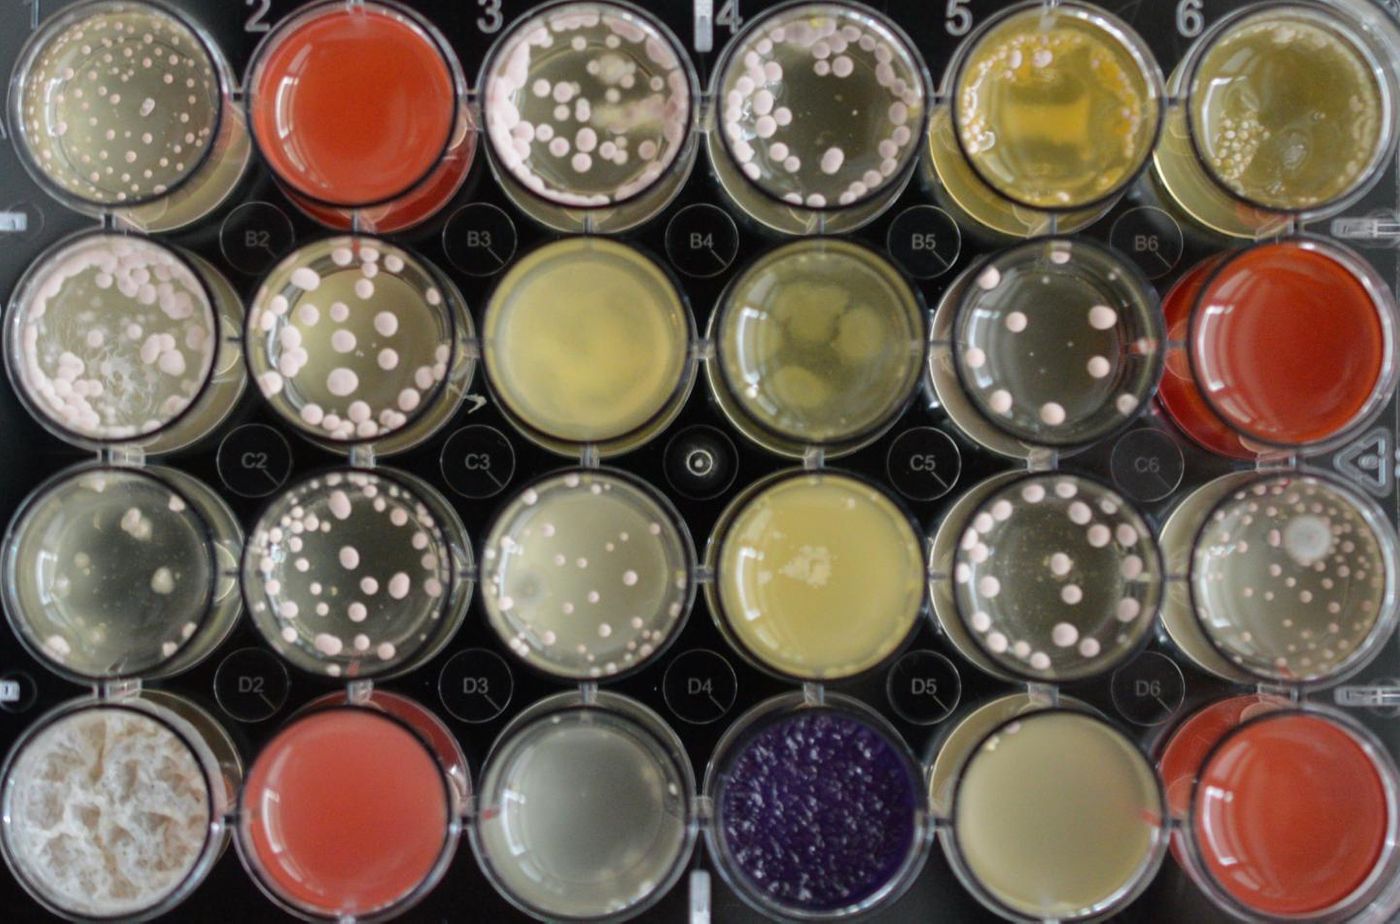 Microorgansims like fungi can be cultivated in the laboratory and stimulated with distinct substances for production of antibiotic metabolic products. / Credit: BiMM Research/Bioactive Microbial Metabolites